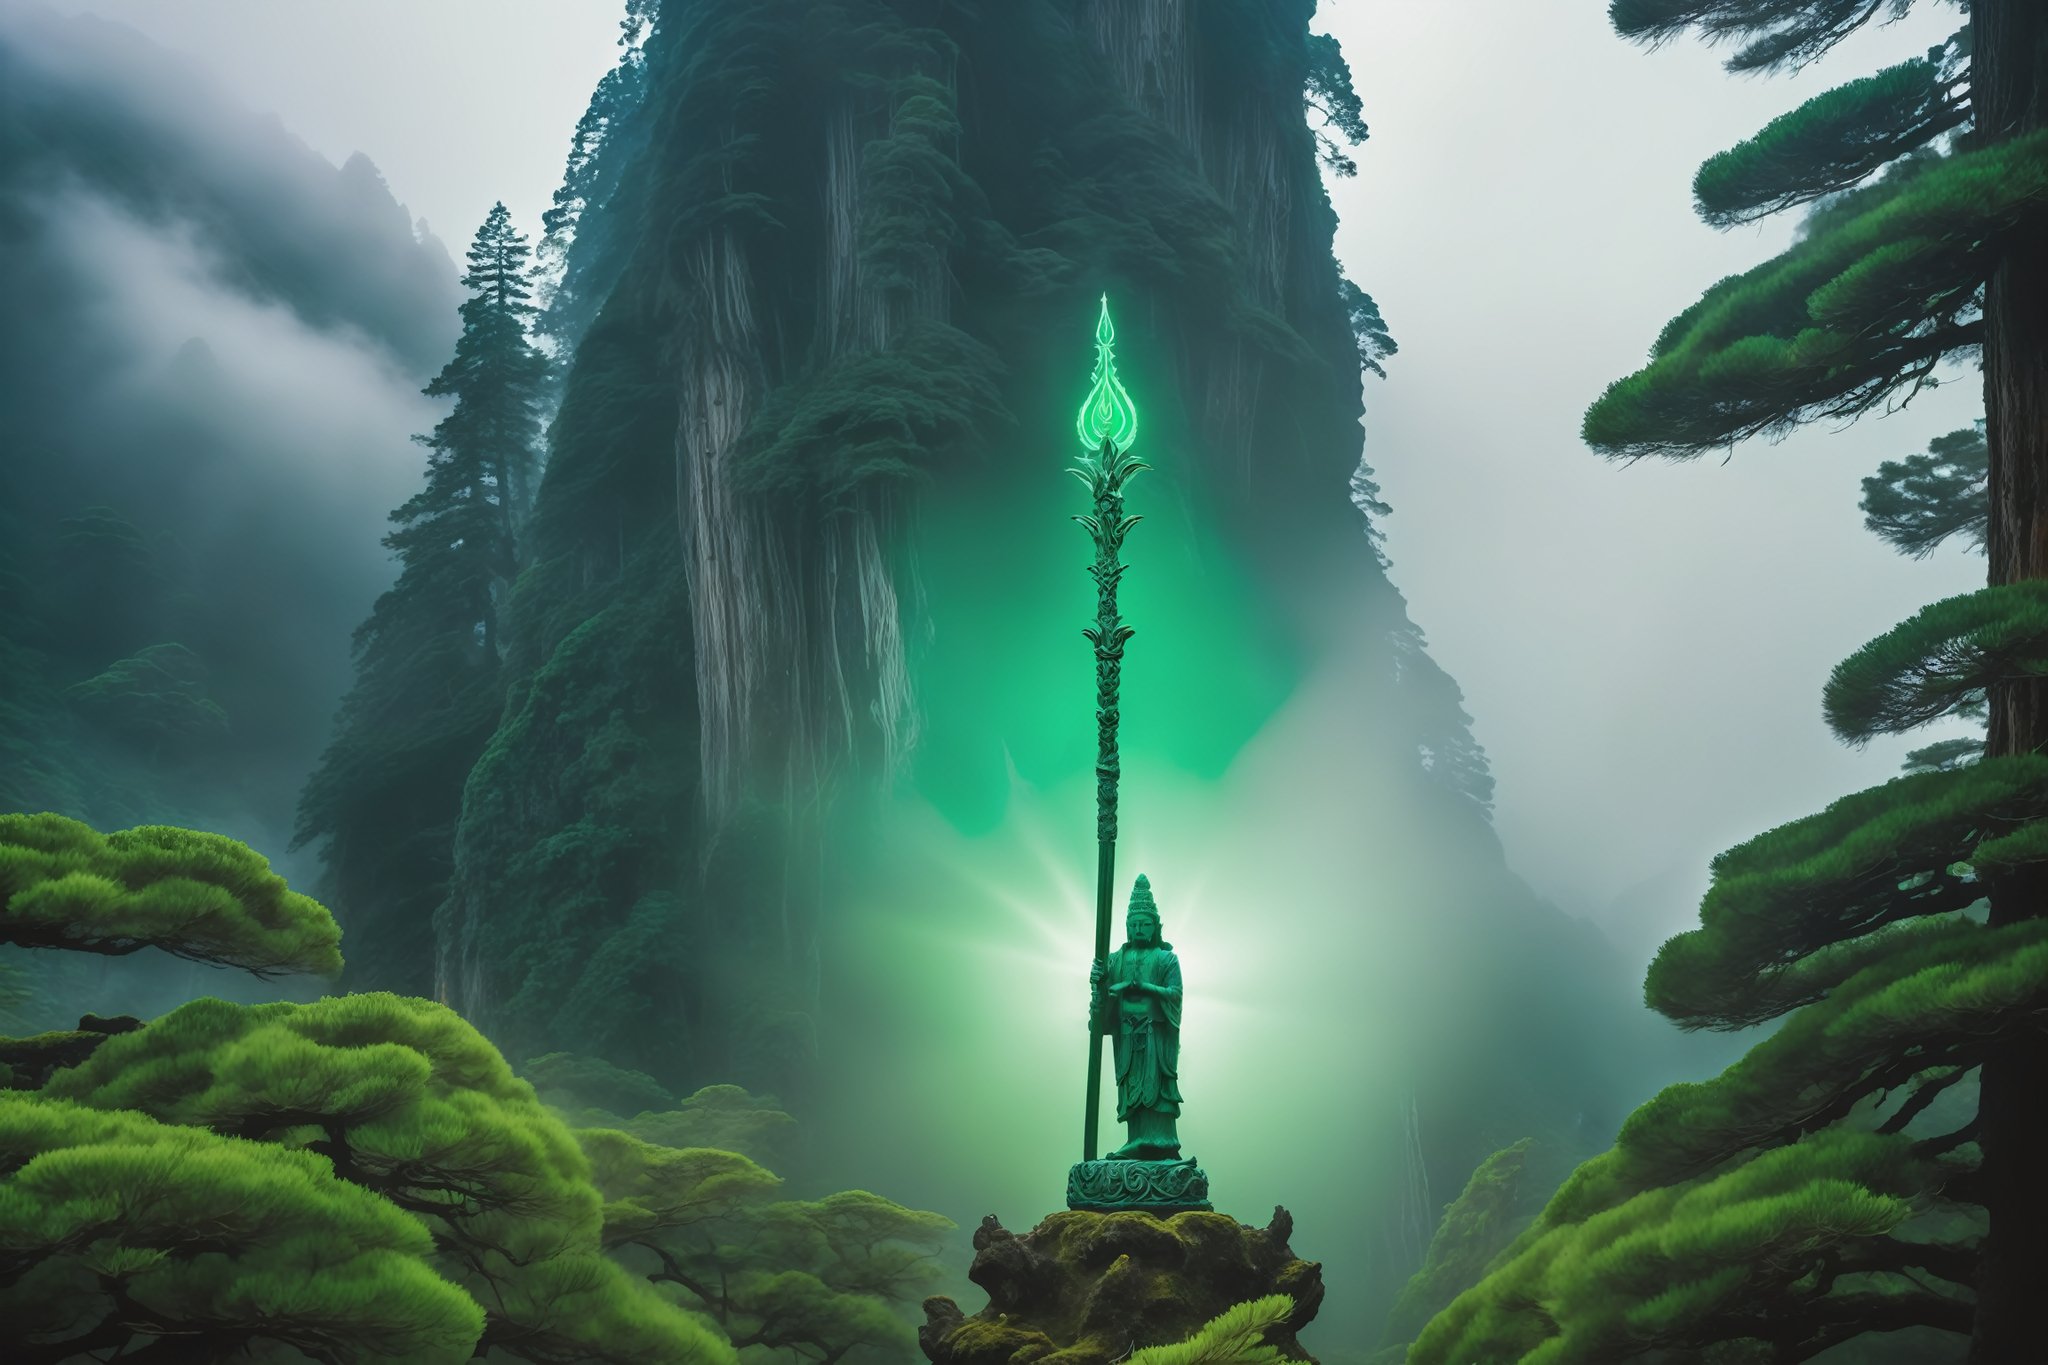 A serene landscape unfolds as a deity holds aloft a majestic pine-wood staff imbued with divine energy, radiating an otherworldly emerald green glow. The camera pans across the mystical setting, capturing the intricate carvings on the staff's surface as it hovers against a backdrop of misty mountains and lush greenery, symbolizing the harmony between nature and the divine.